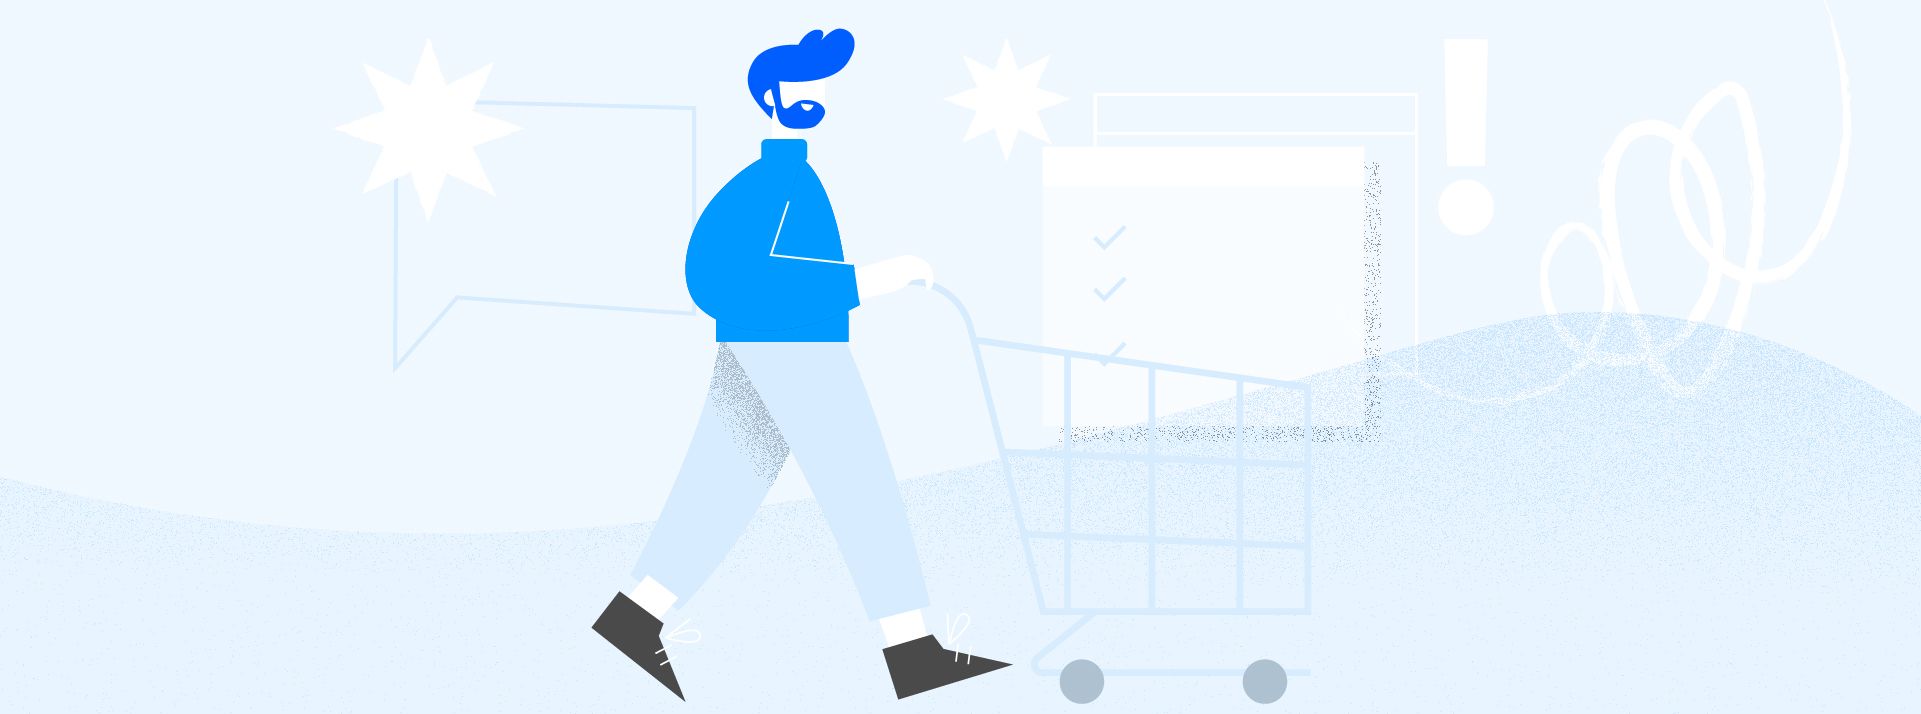 Consumer pushing shopping cart with lots of noise in background to represent trends shifting and changing